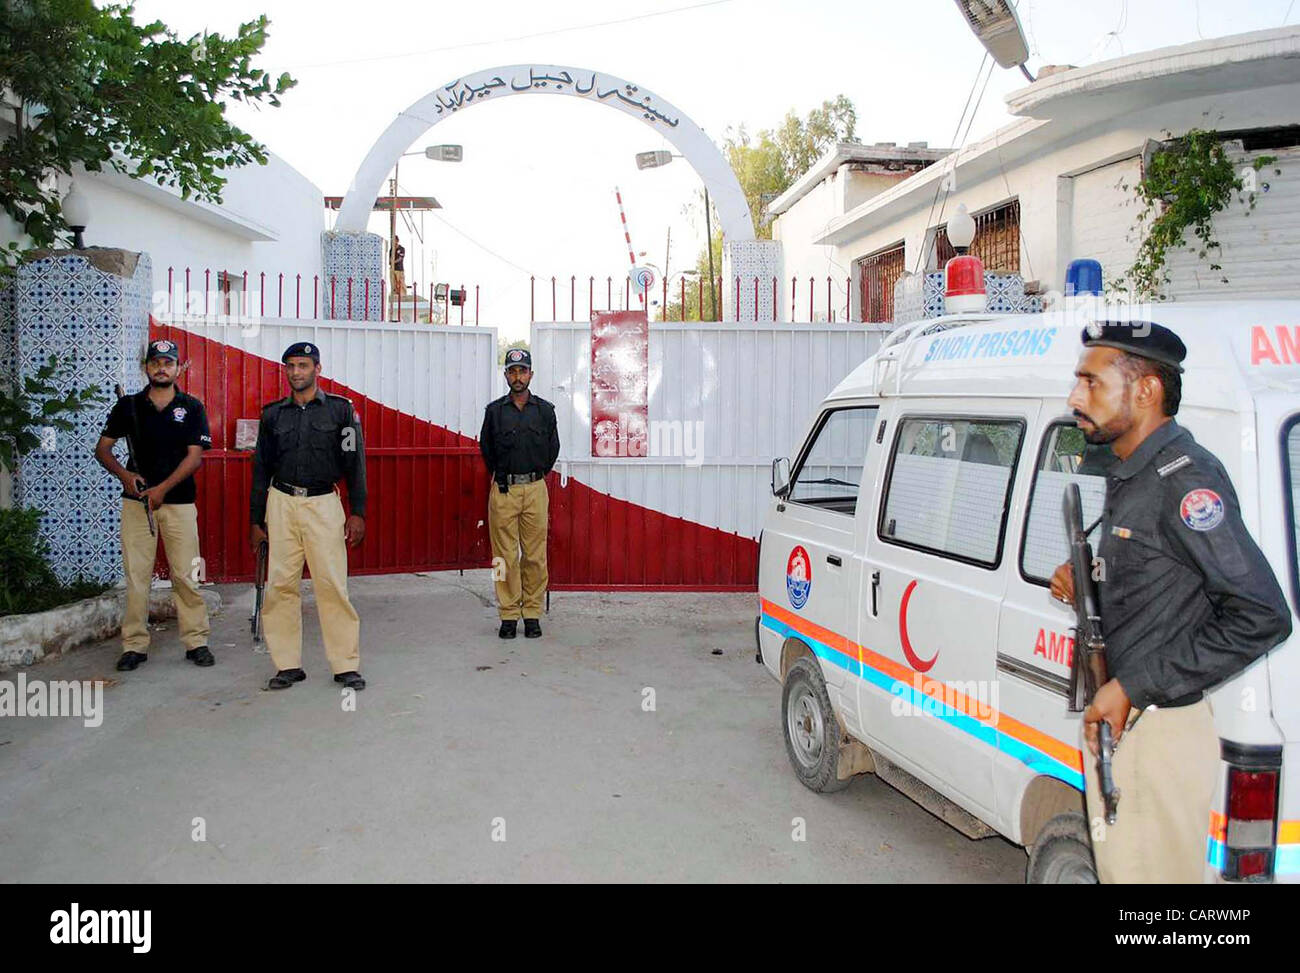 Policemen stand guard at central prison as four prisons in Sindh province including Hyderabad central prison, Karachi central prison, Landhi prison and Sukkur prison are declared sensitive on Monday after militants attack at Bannu prison, in Hyderabad on Monday, April 16 Stock Photo